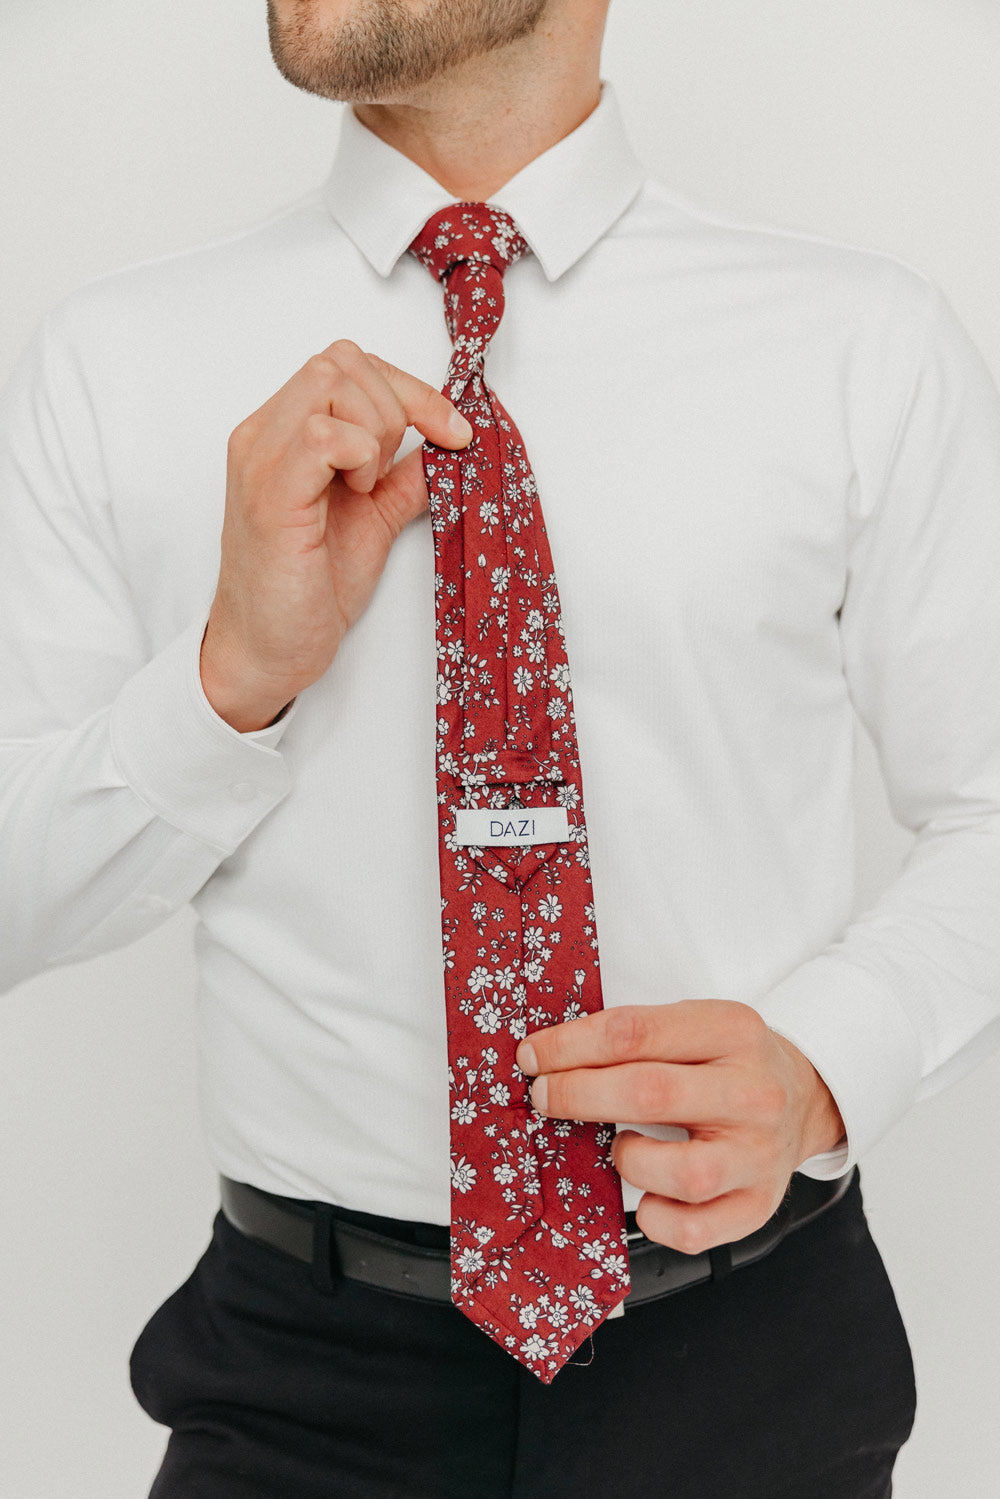 Mahogany tie worn with a white shirt, black belt and black pants.